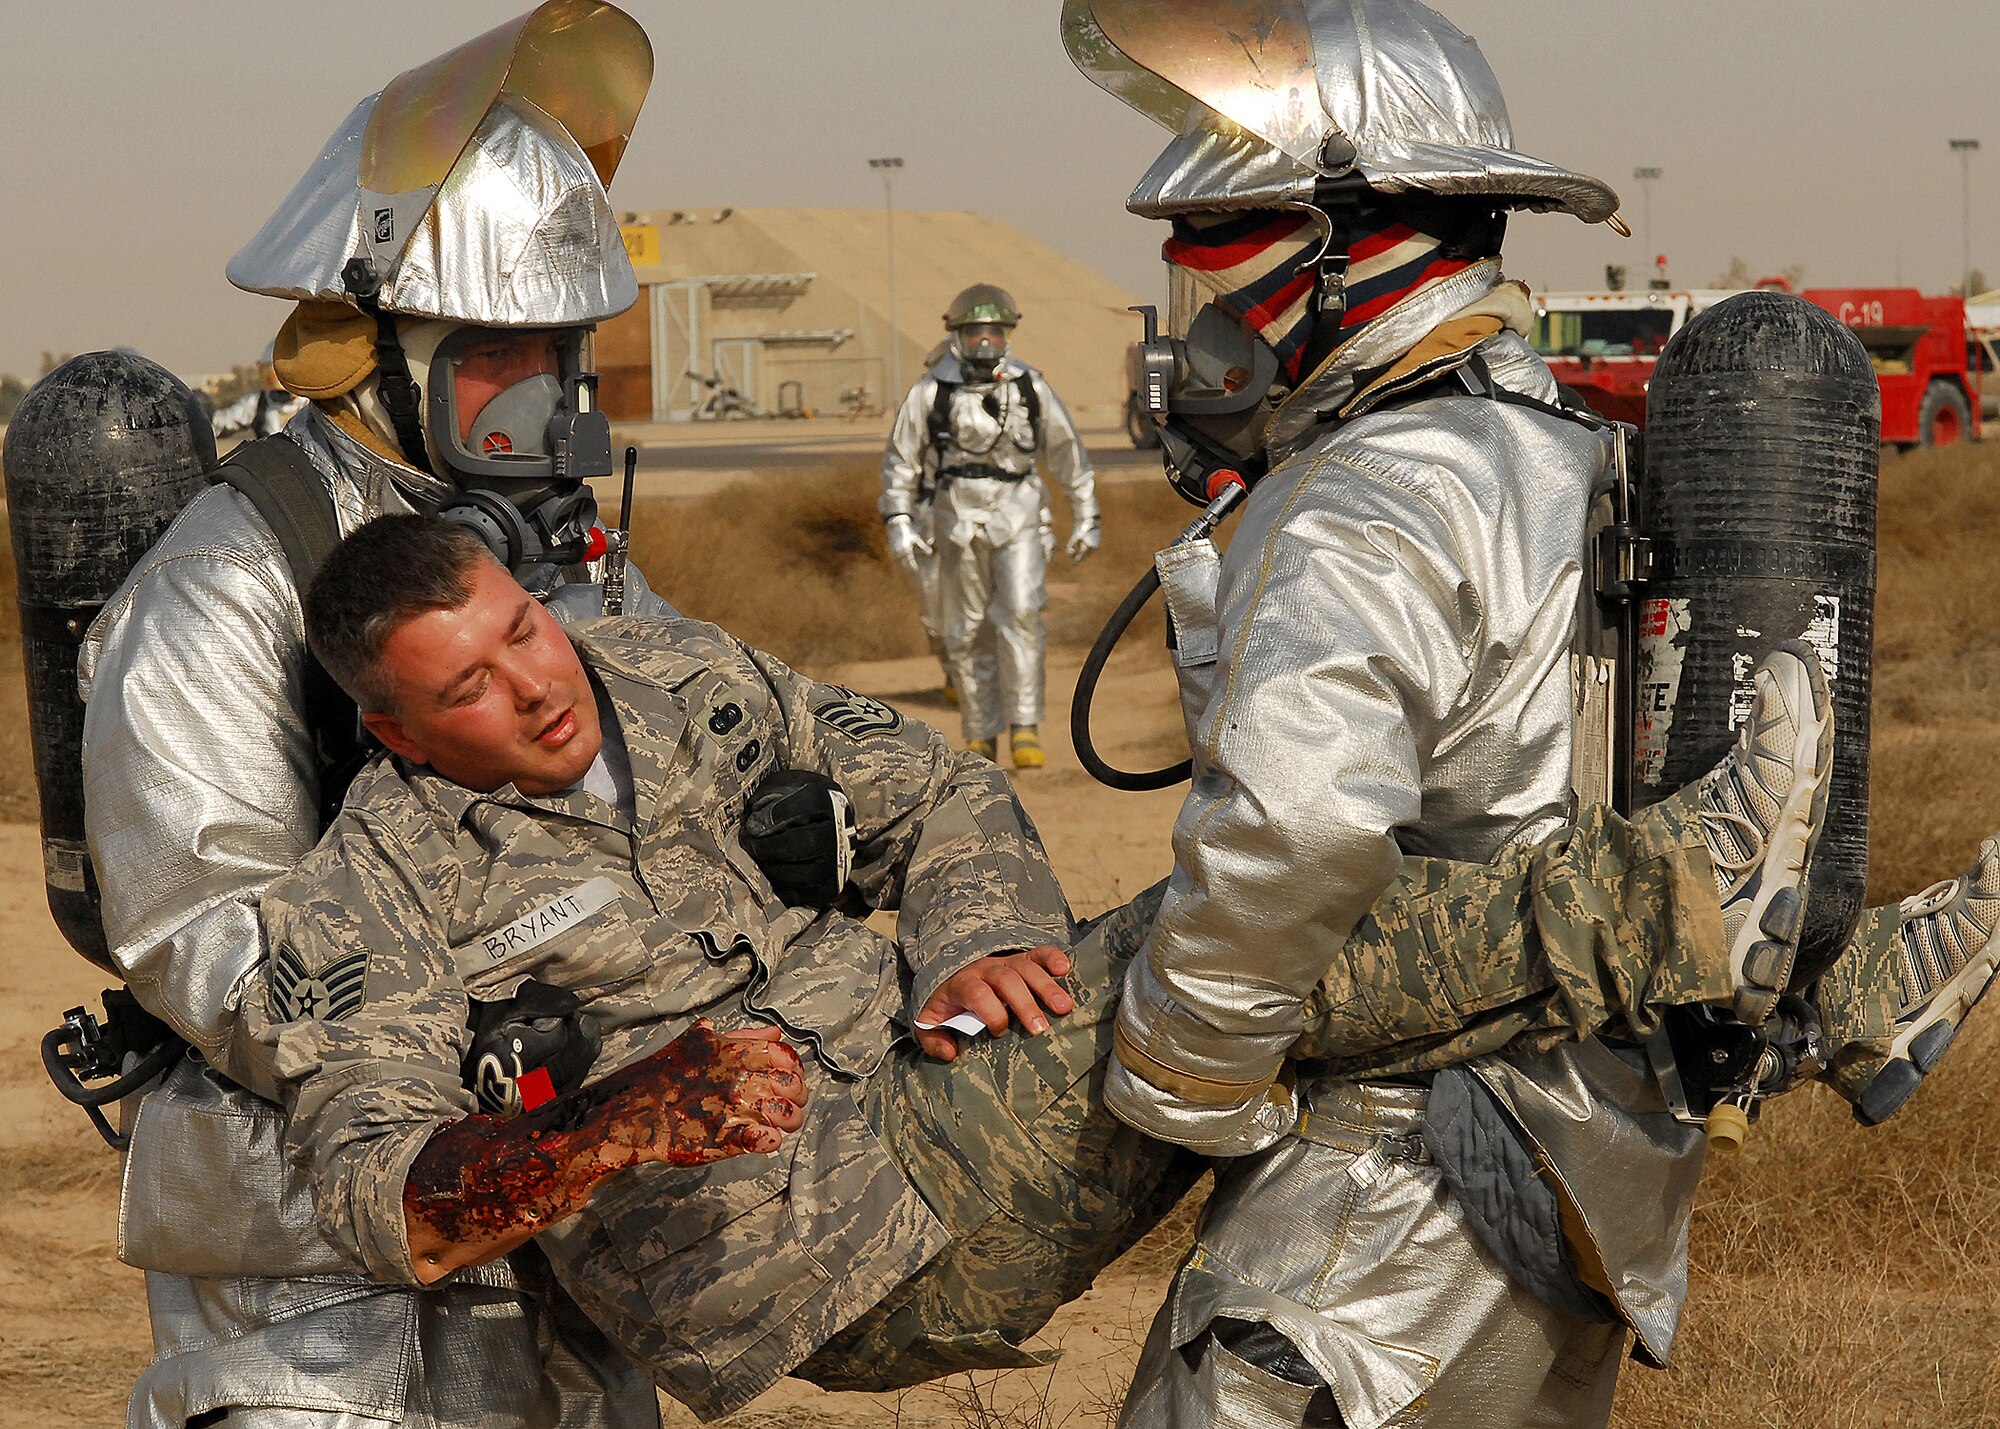 SOUTHWEST ASIA -- Firefighters from the 386th Expeditionary Civil Engineering Squadron transport a patient during a mass casualty exercise on Oct. 29 at an air base in Southwest Asia. The exercise tested the 386th Air Expeditionary Wing's ability to respond to a major accident in a deployed environment. (U.S. Air Force photo/Airman 1st Class Nicole Brosseau)